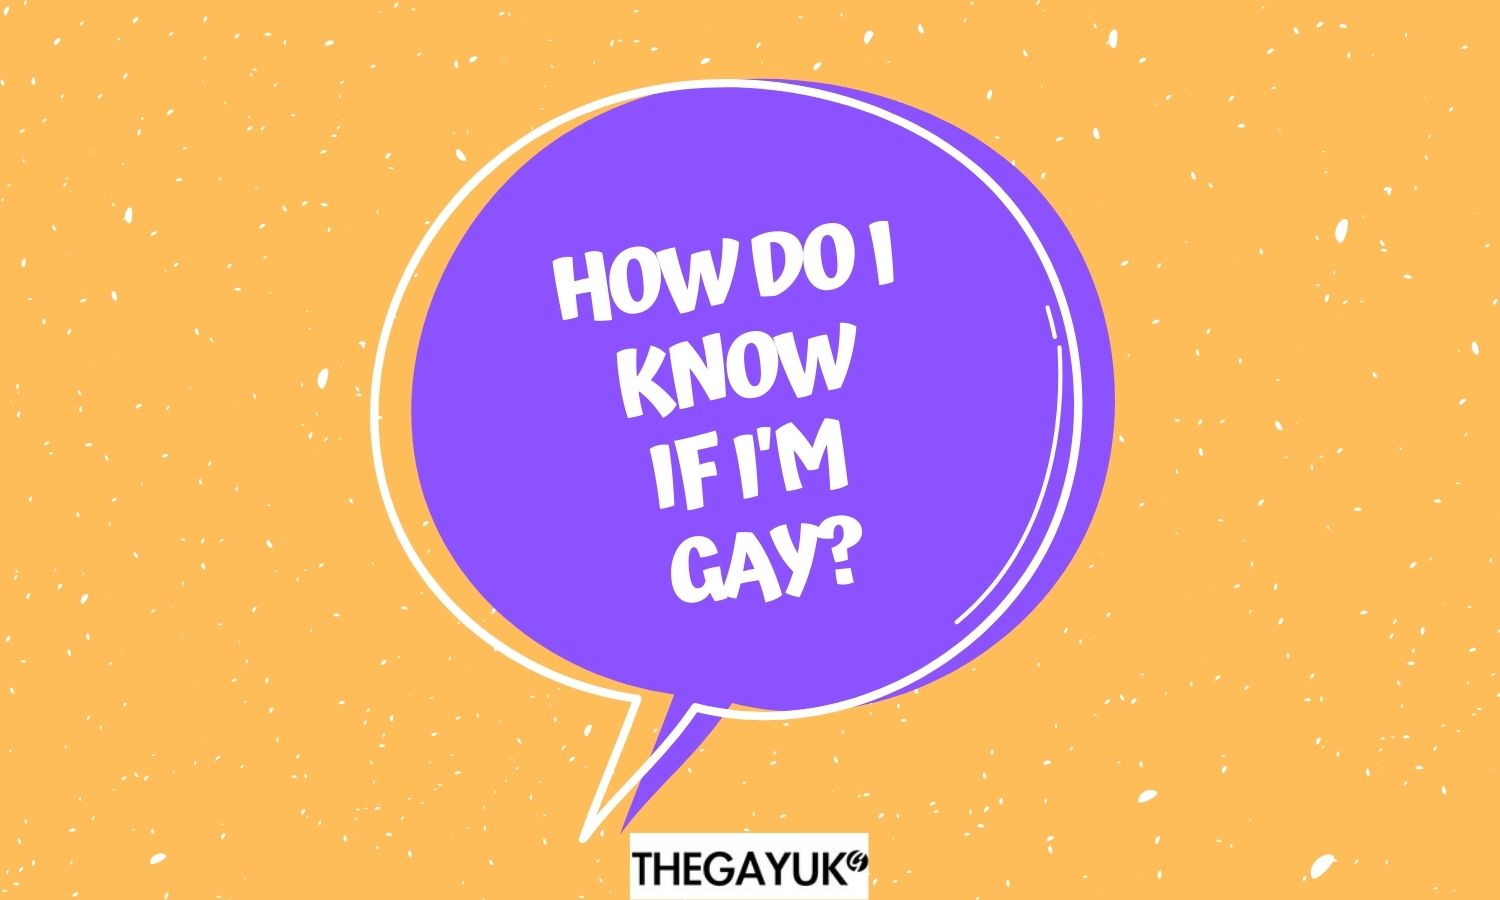 How do I know if I'm gay?